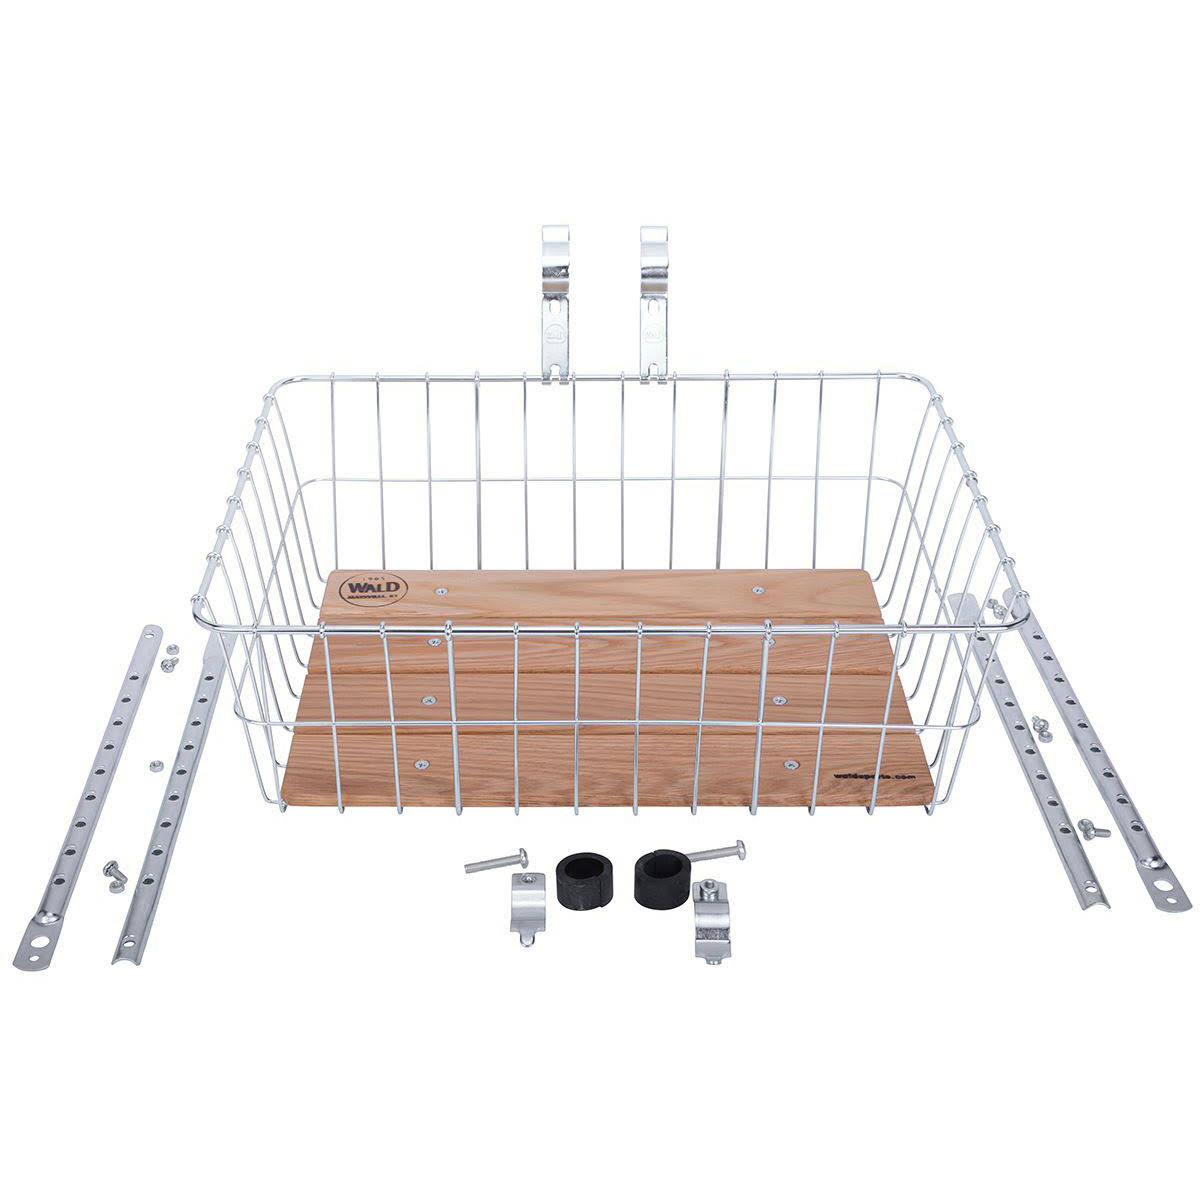 Wald Basket 1392 Standard with Multifit Braces - Silver, Large 18 x 13 x 6